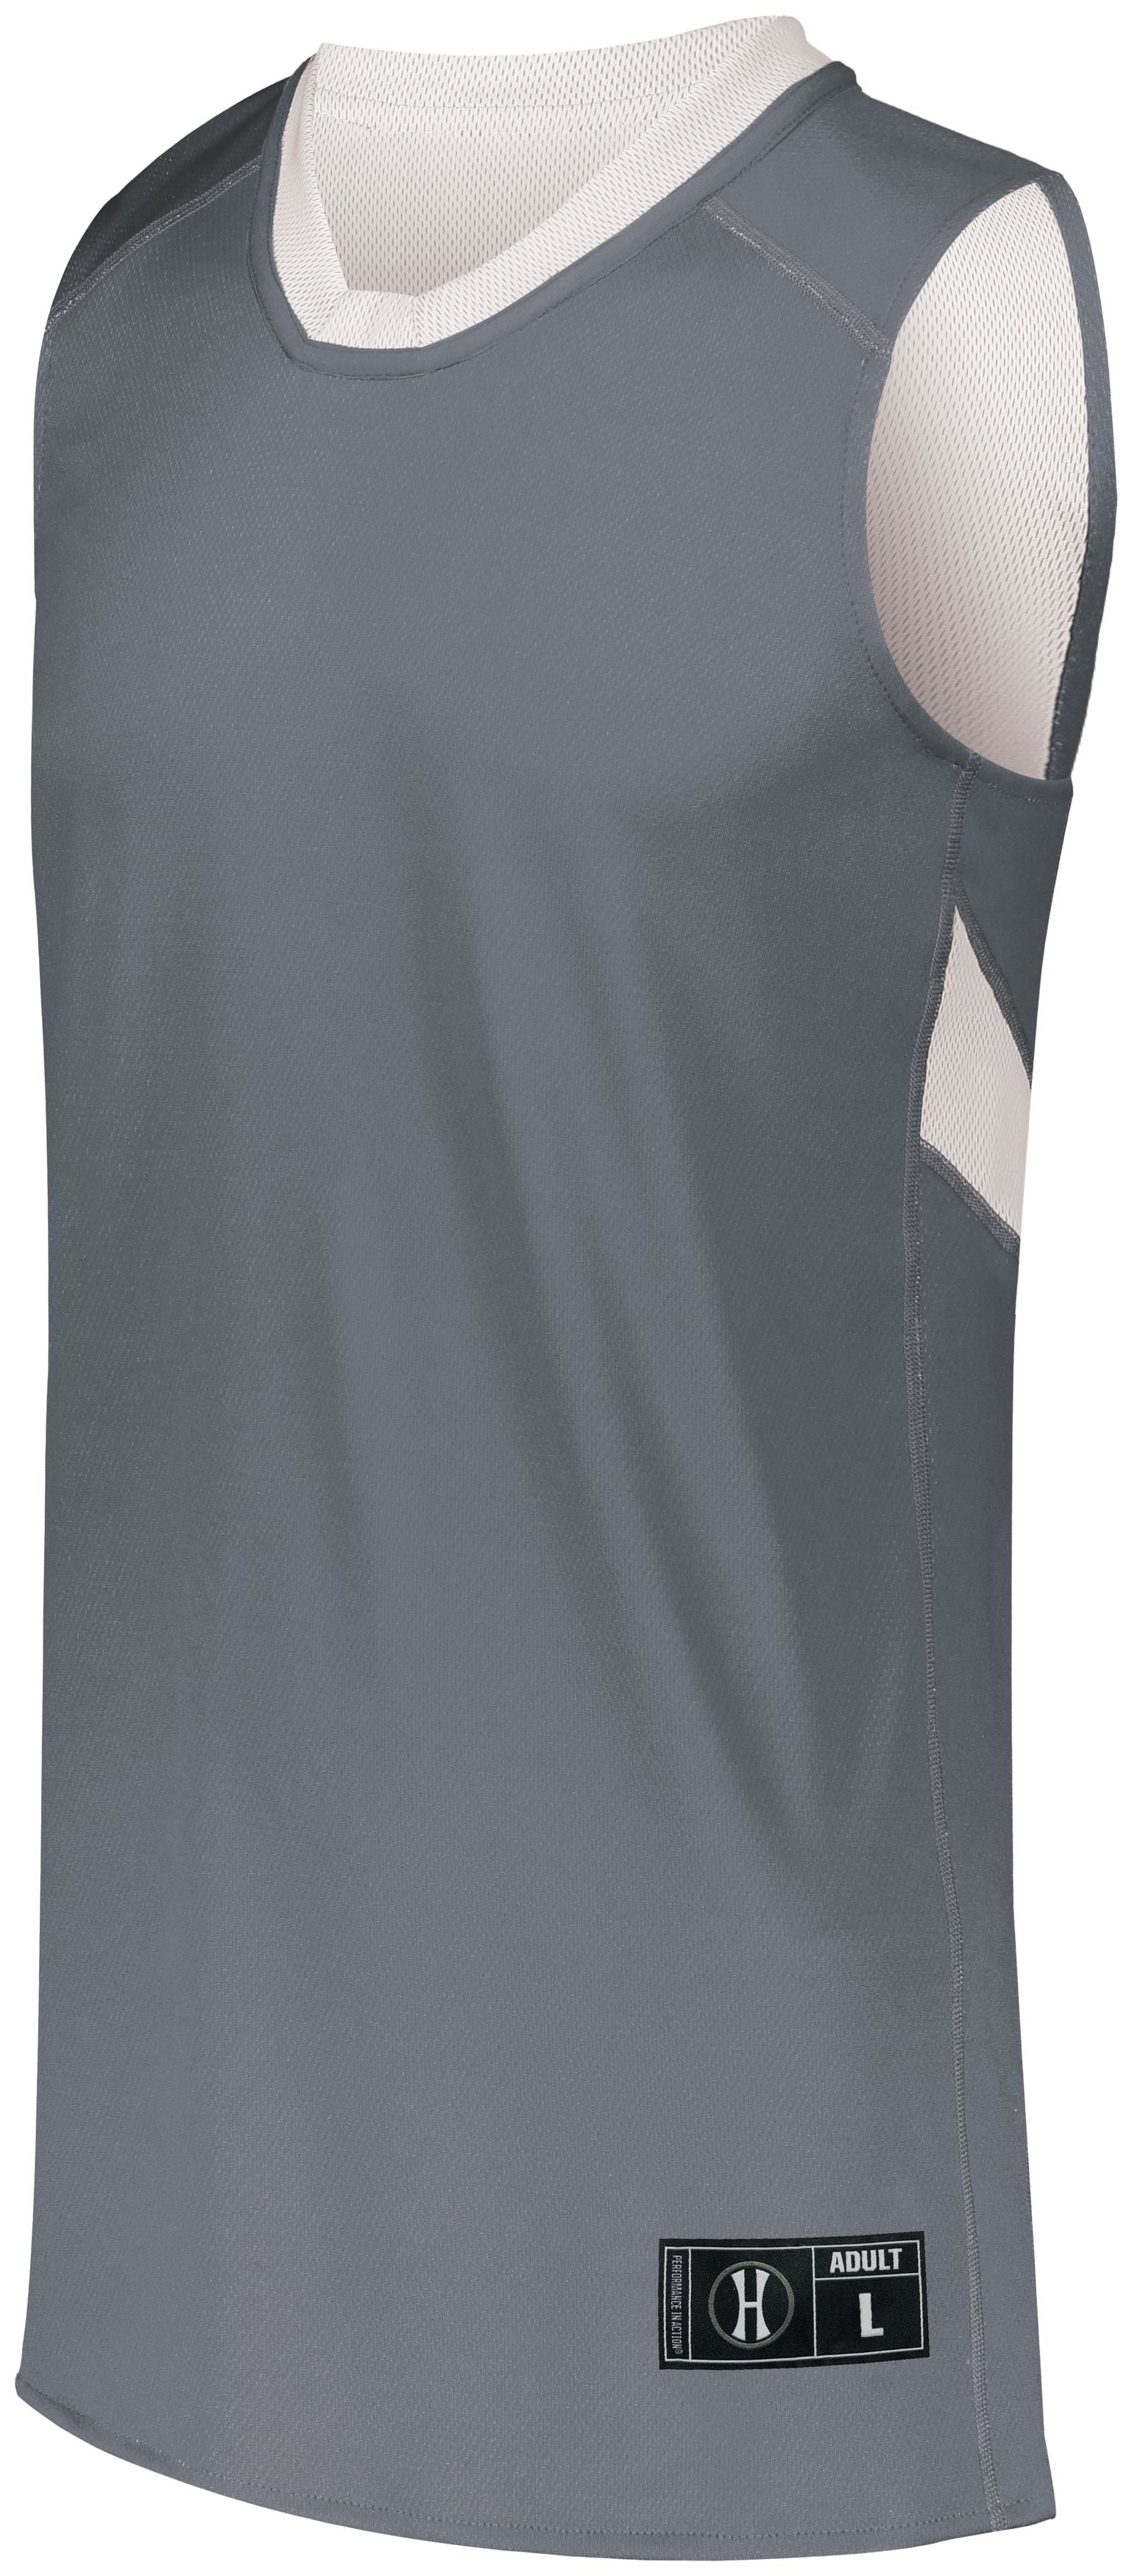 Holloway Dual-Side Single Ply Basketball Jersey in Graphite/White  -Part of the Adult, Adult-Jersey, Basketball, Holloway, Shirts, All-Sports, All-Sports-1 product lines at KanaleyCreations.com